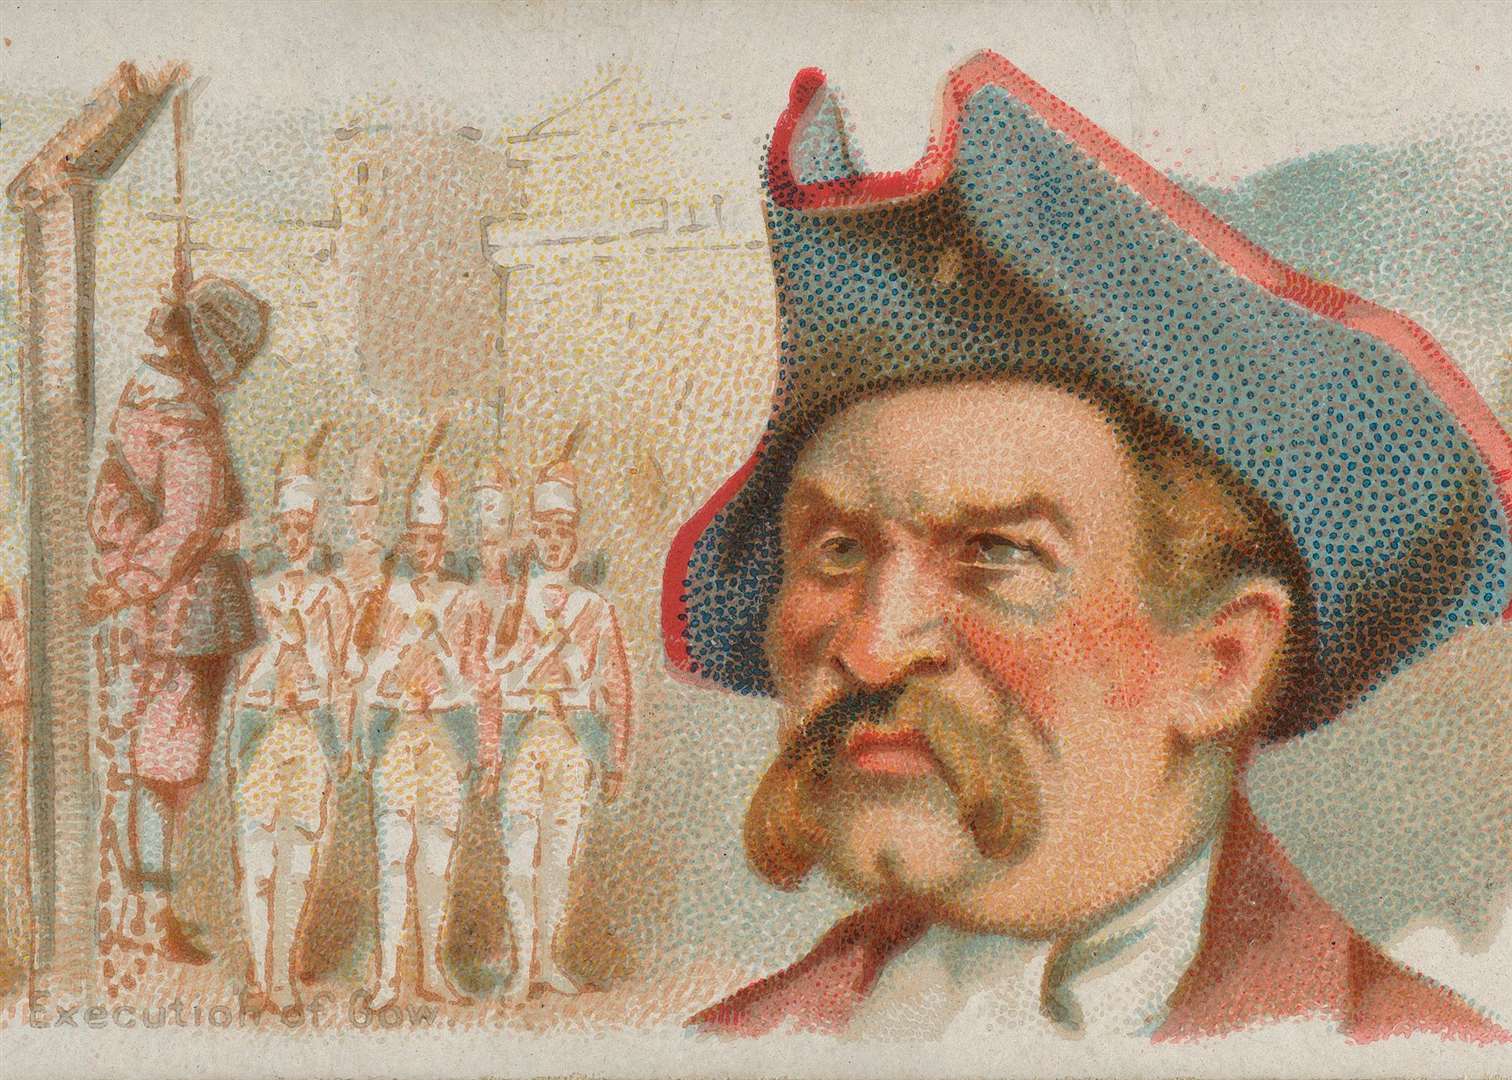 An artist’s impression of the hanging of Pirate Gow.